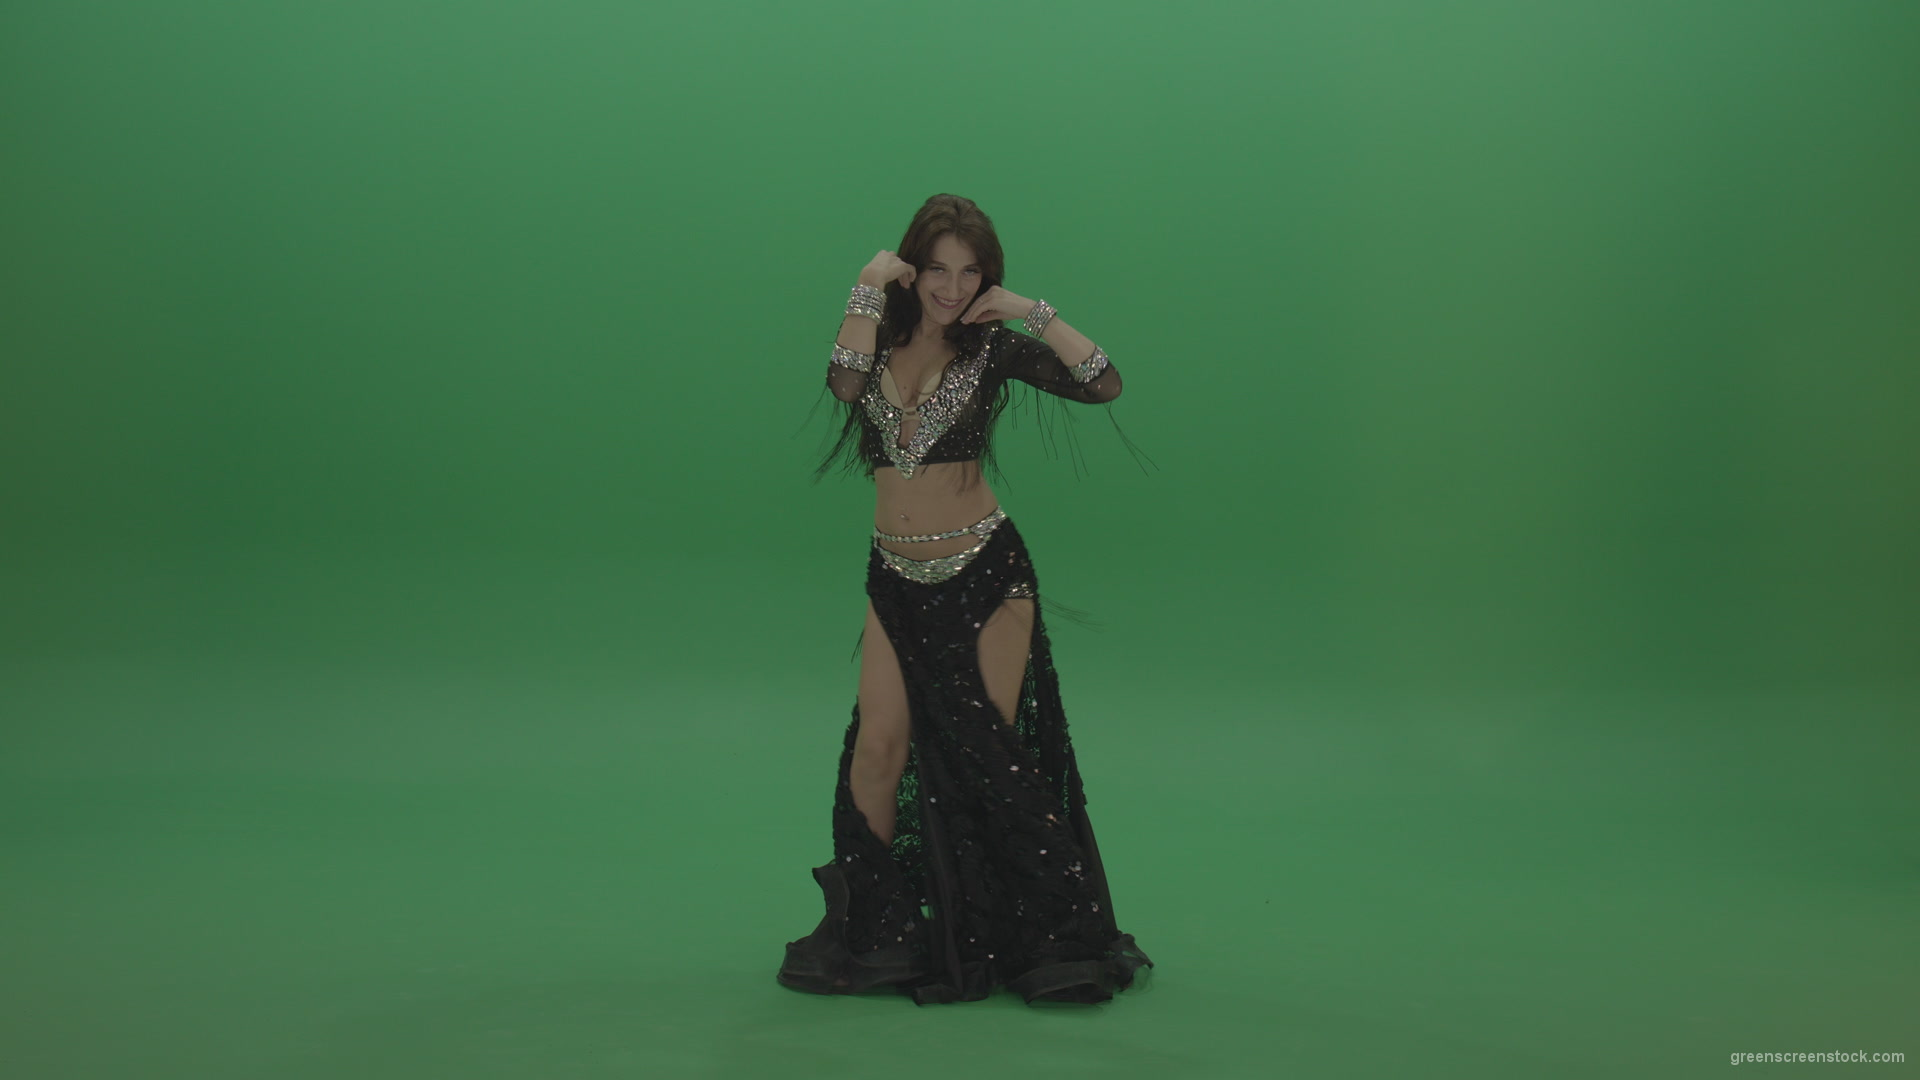 Adorable-belly-dancer-in-black-wear-display-amazing-dance-moves-over-chromakey-background_006 Green Screen Stock